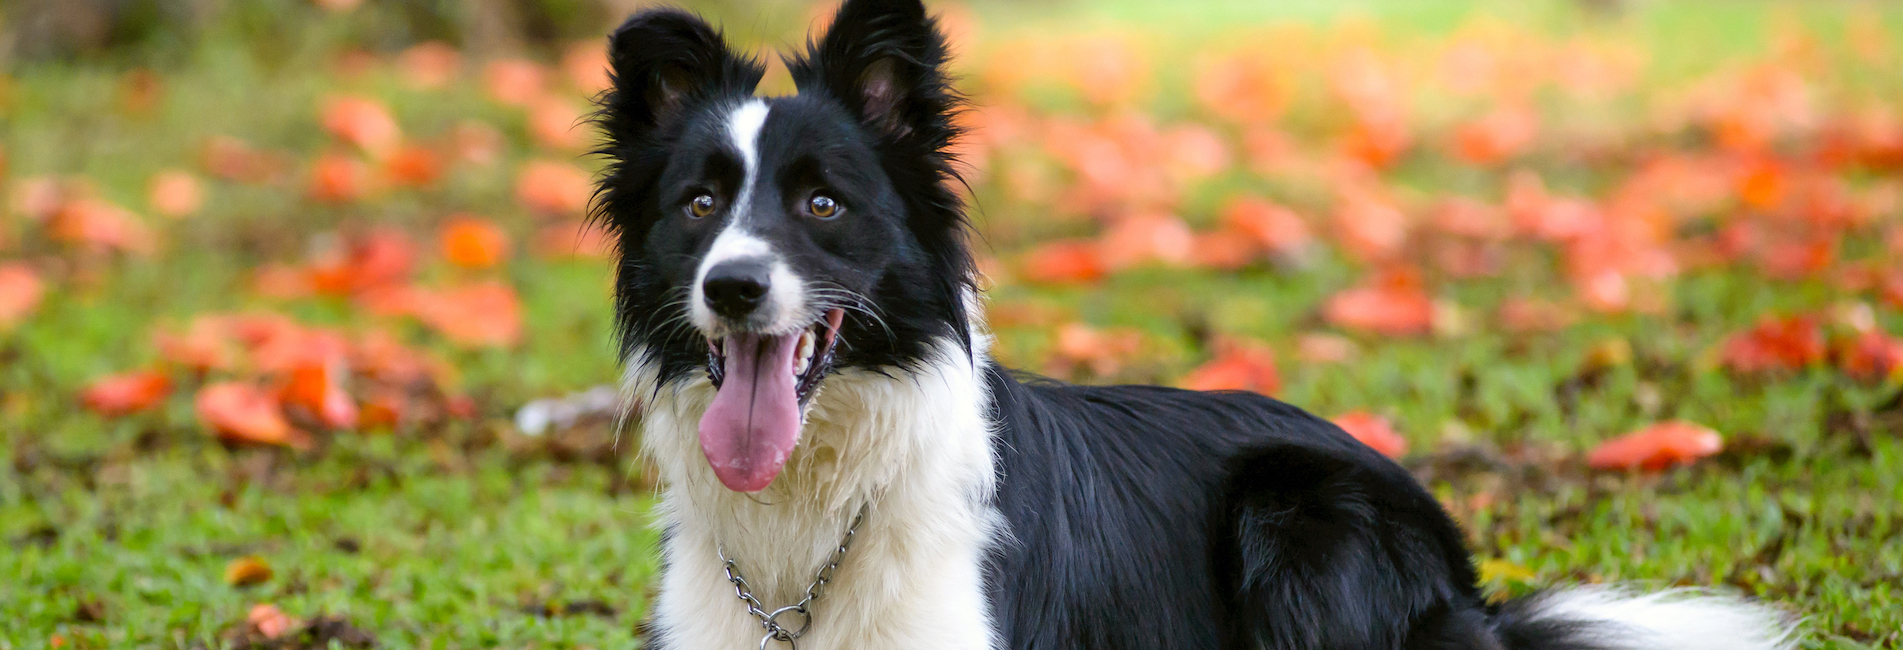 The Ultimate Border Collie Guide - Dog Walks Near Me